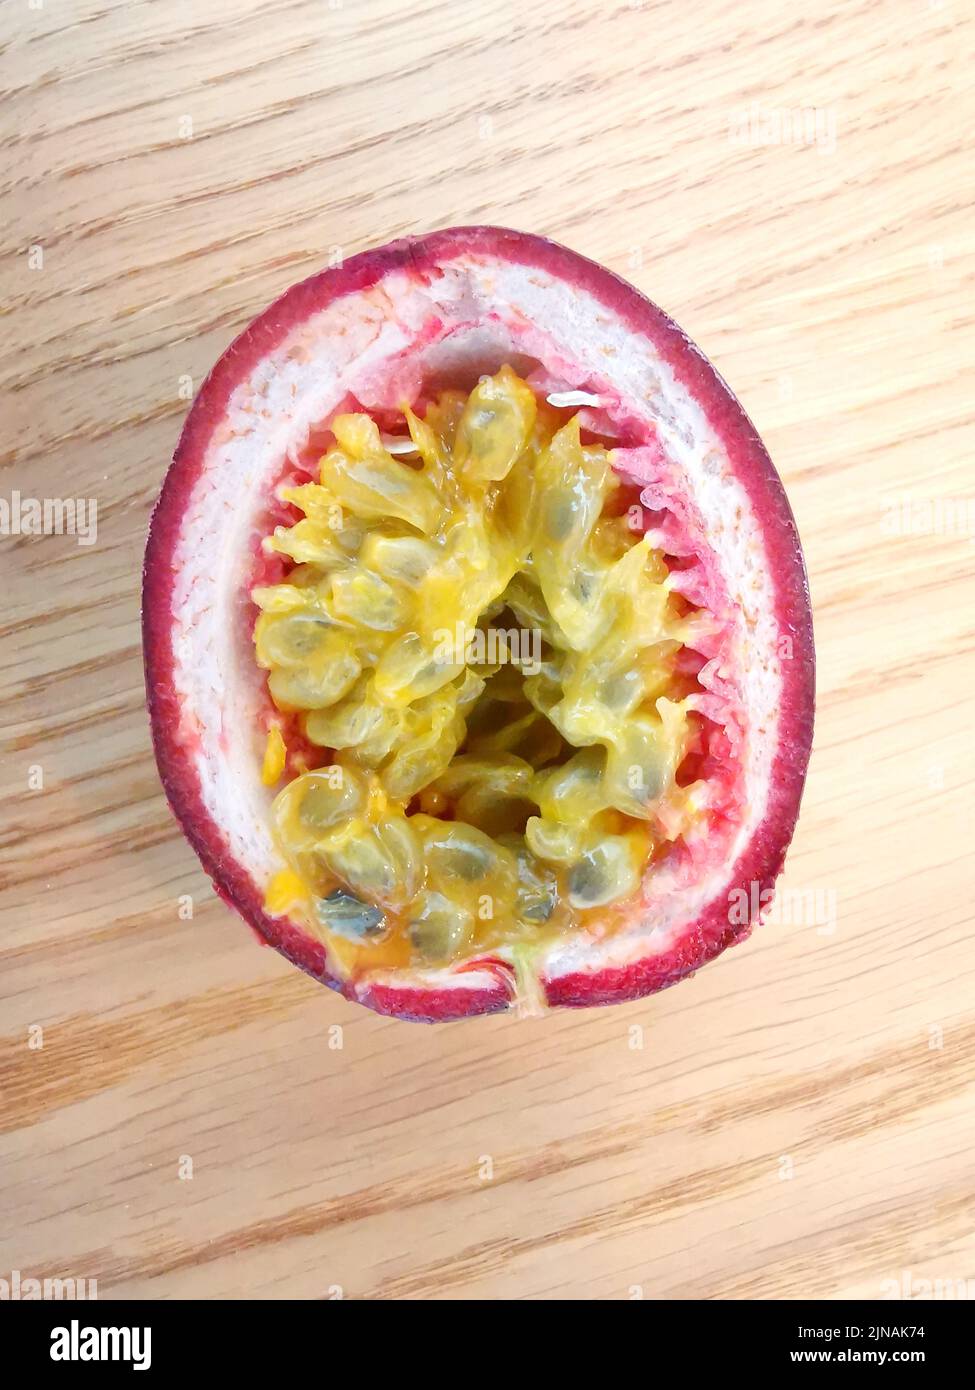 Half passion fruit showing yellow seeds and pink skin lying on wooden table Stock Photo